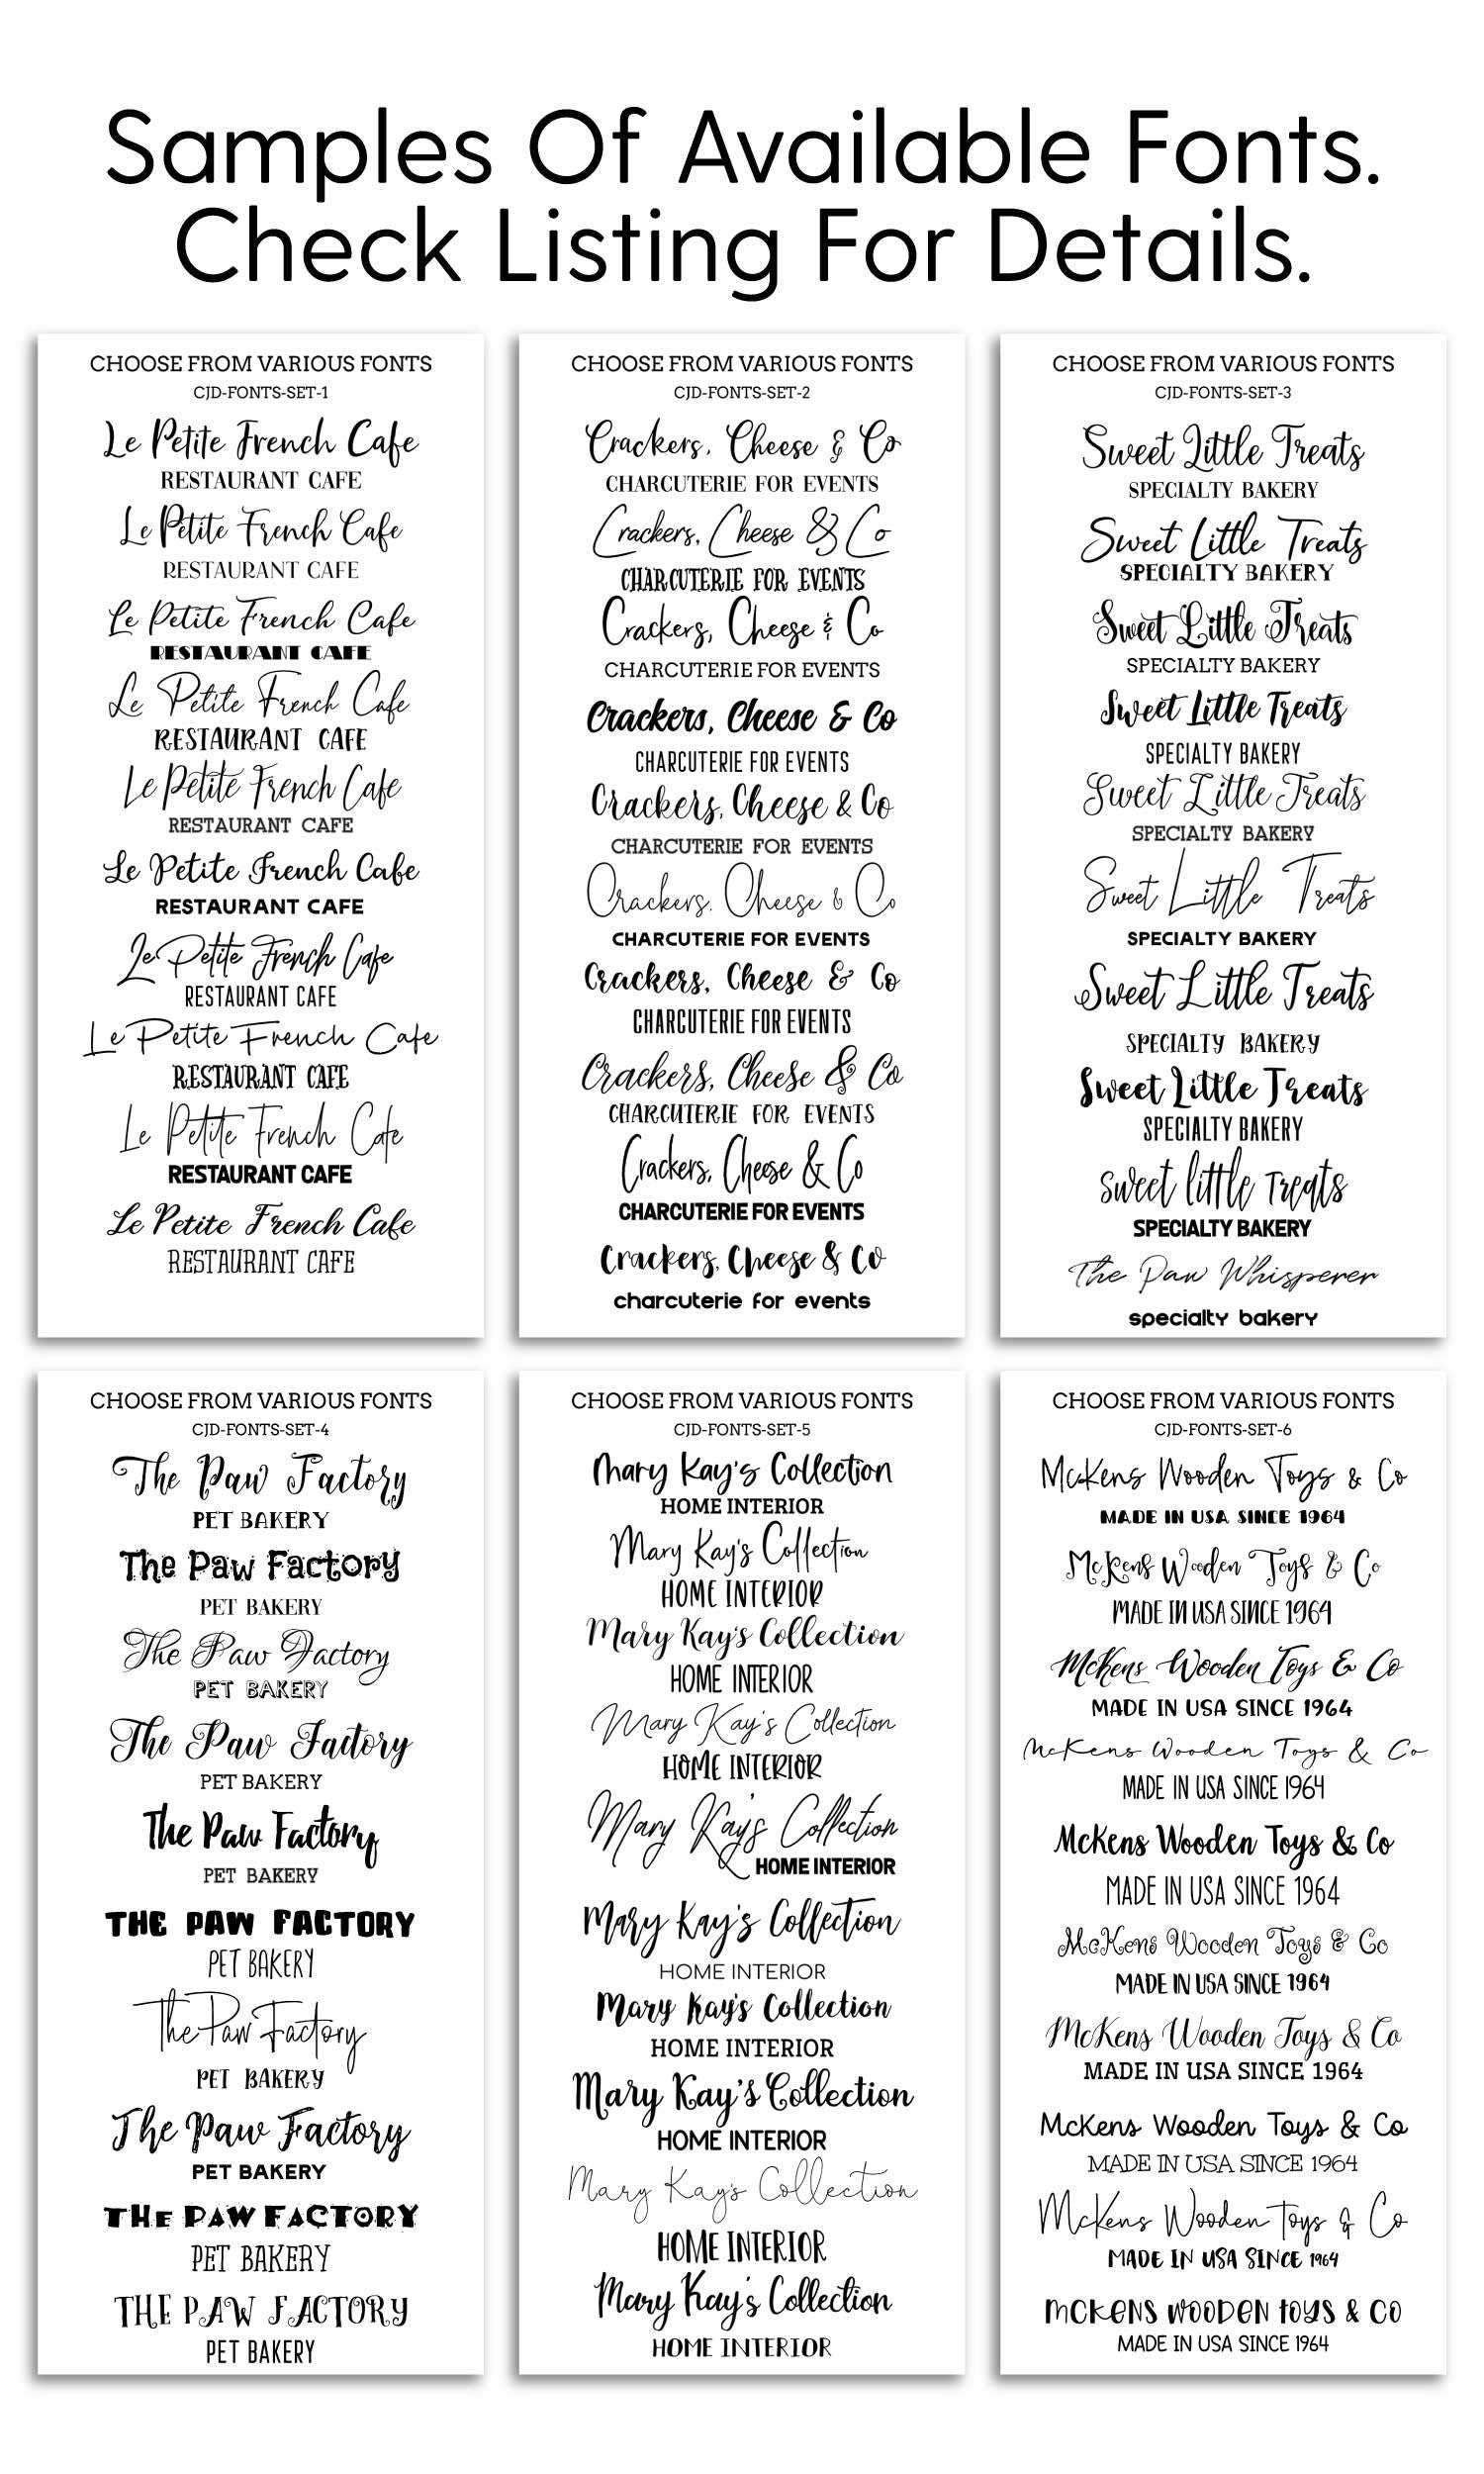 Bakery Gift Coupons, Pastry - Candy Jar Studios